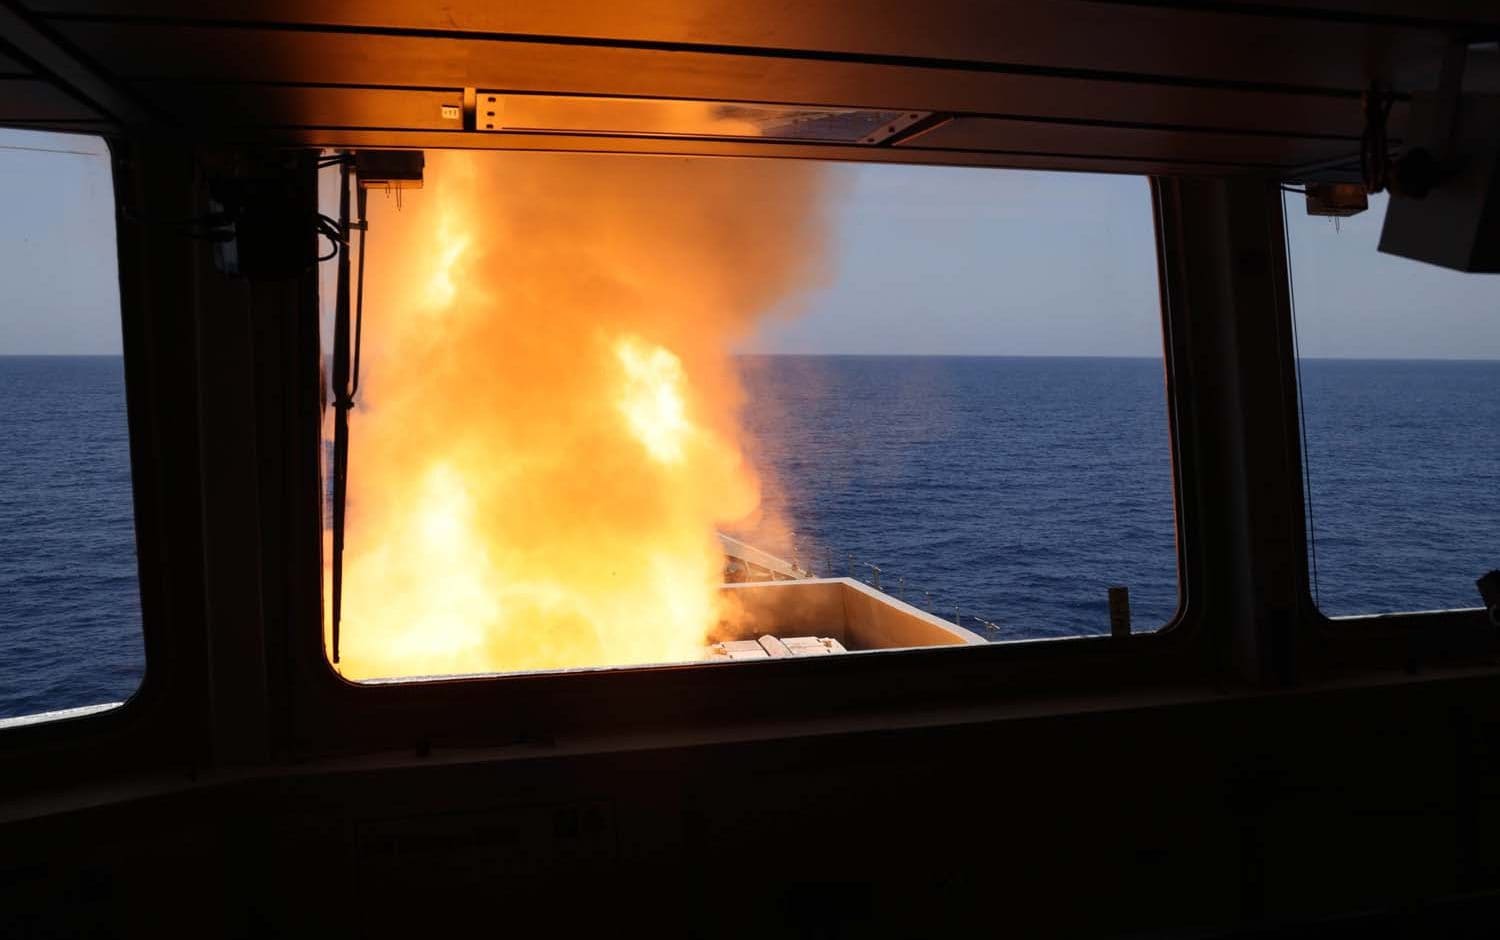 royal navy ship shoots down ballistic missile in combat for first time